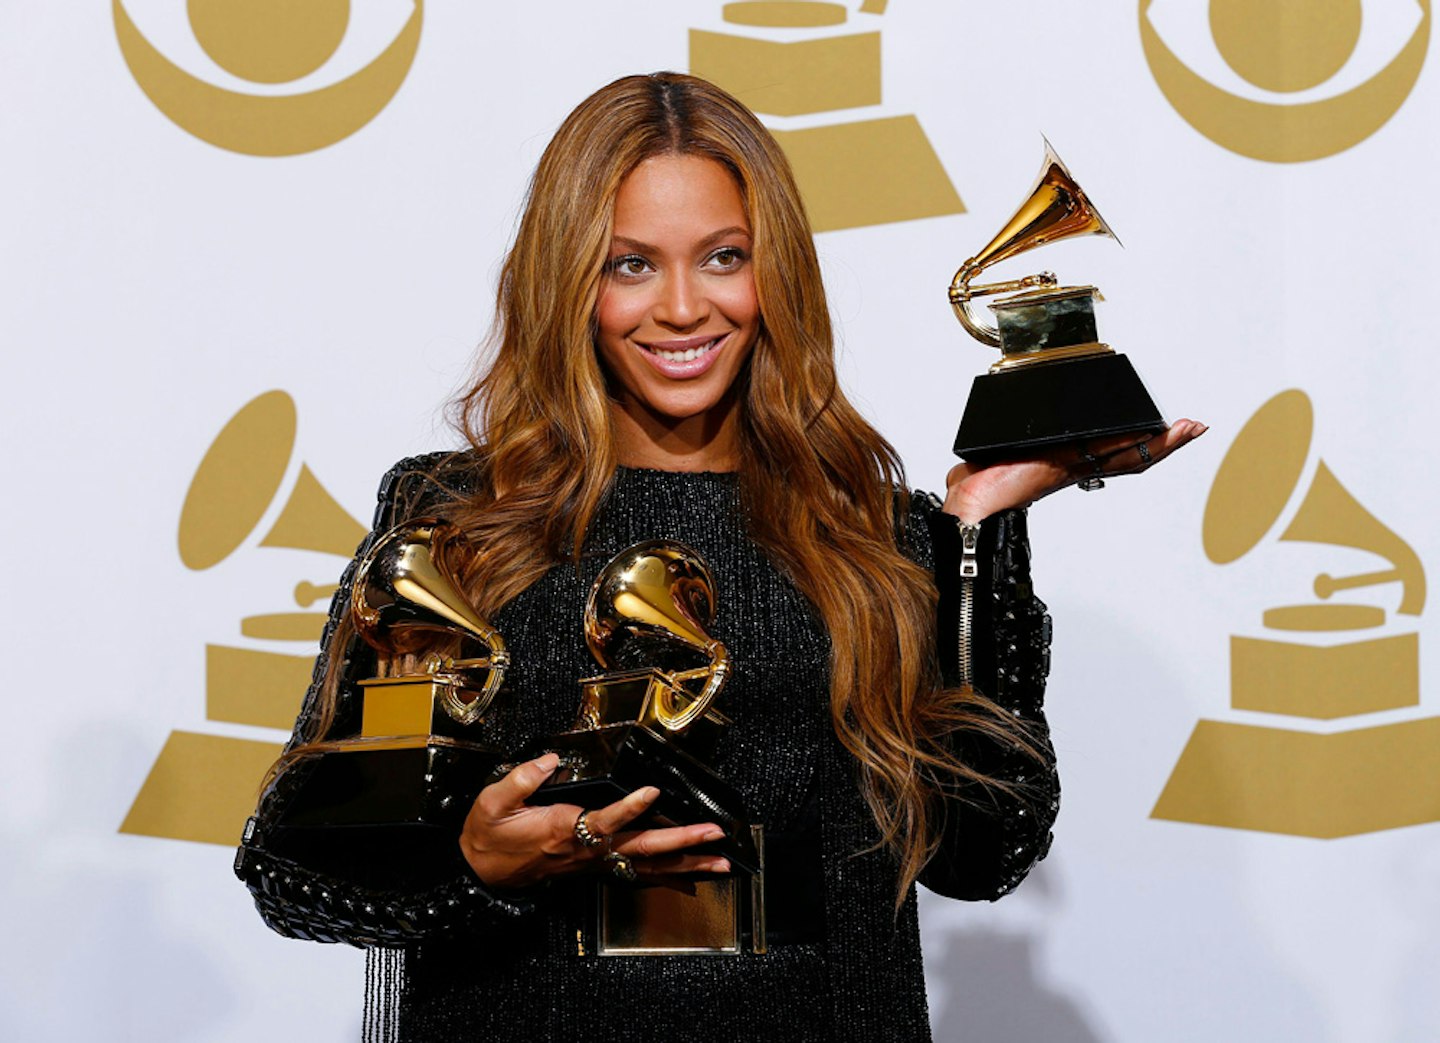 Beyoncu00e9 with her three Grammy Awards in 2015